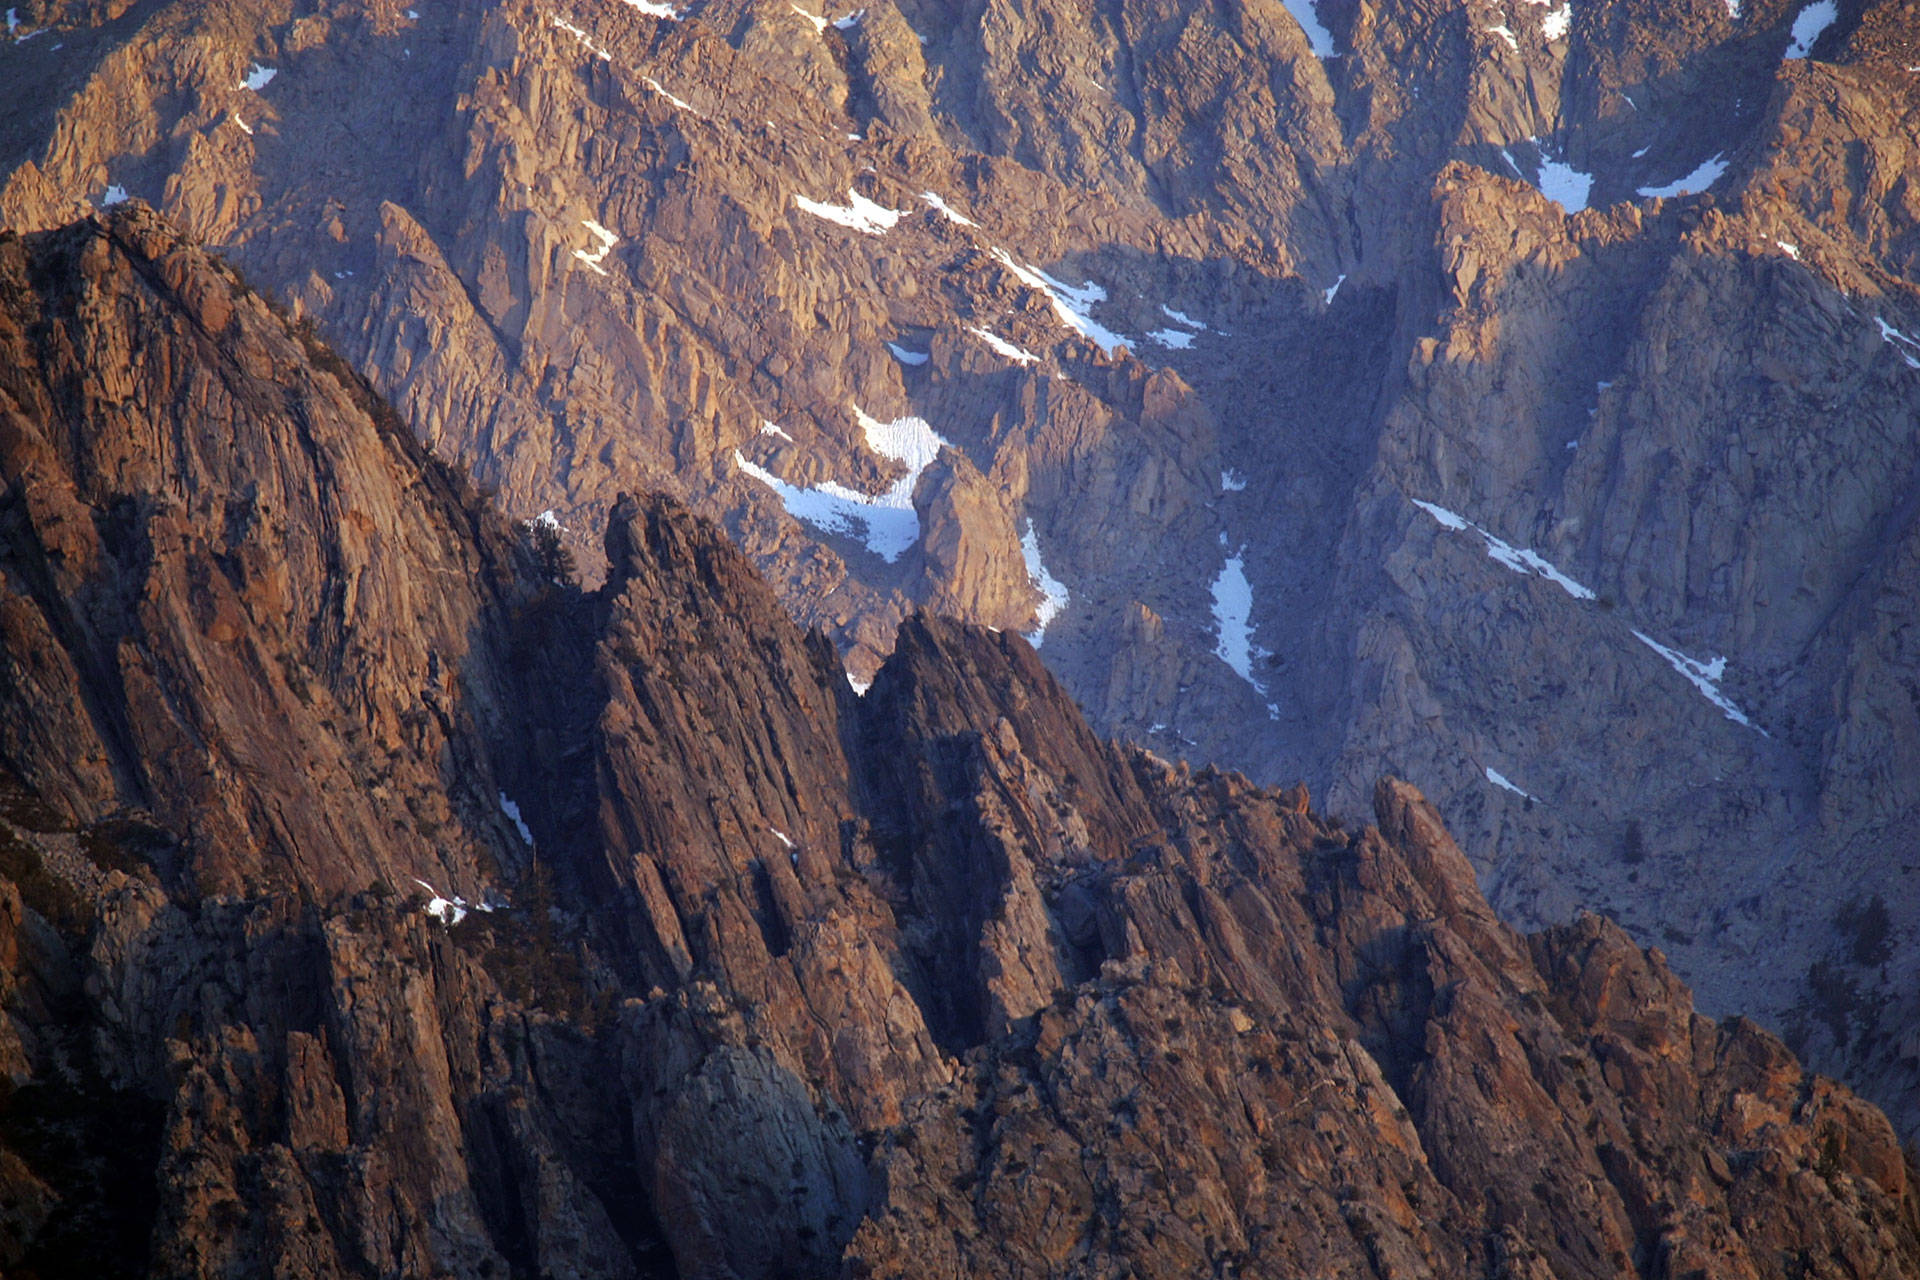 Alpine crags rise north of Mount Whitney in the Sierra Nevada. David McNew/Getty Images